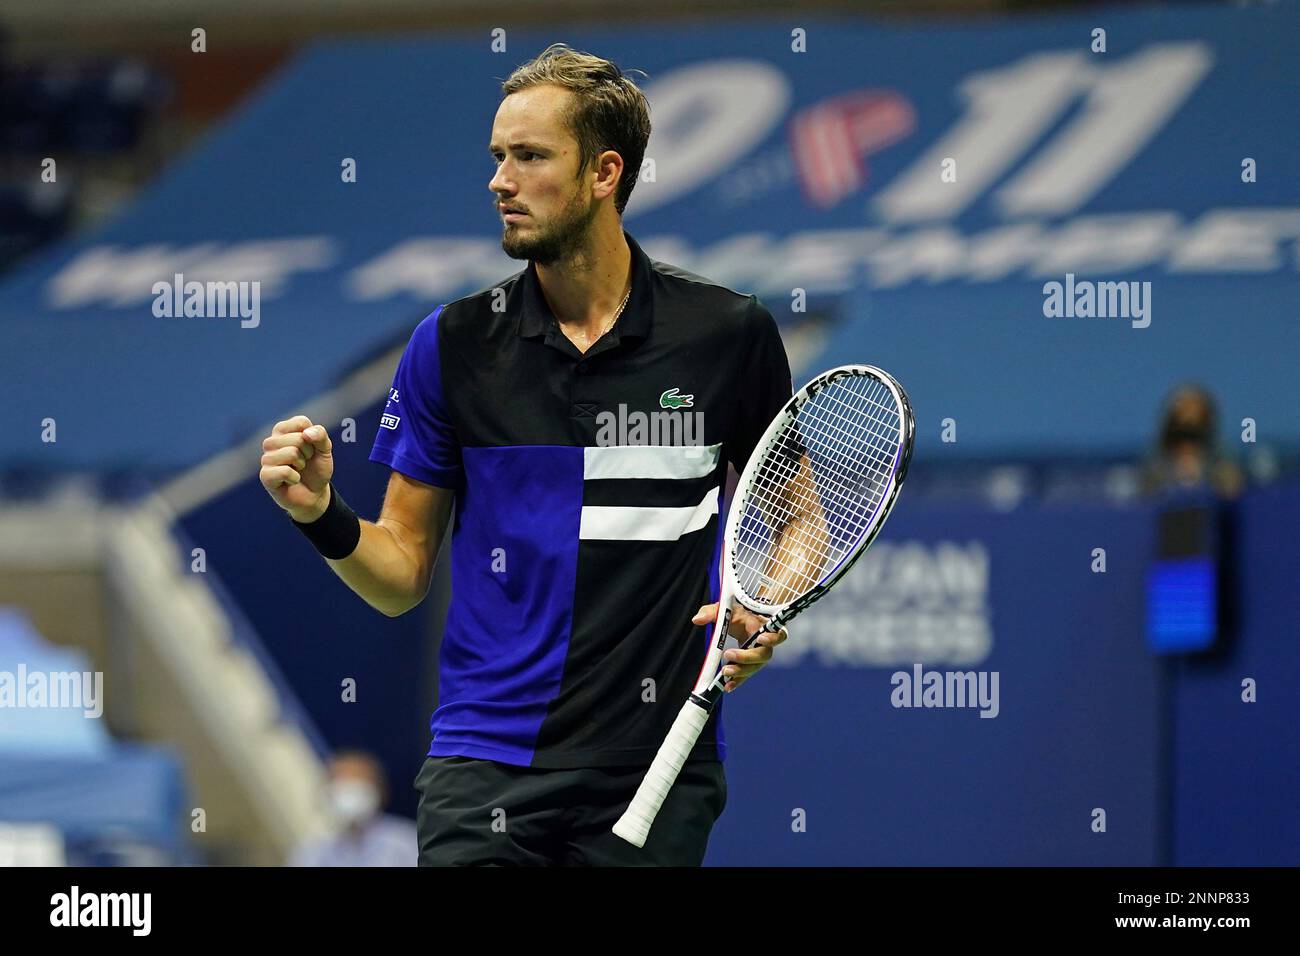 Daniil Medvedev in action against Dominic Thiem during a men's singles  Semifinal match at the 2020 US Open, Friday, Sept. 11, 2020 in Flushing,  NY. (Darren Carroll/USTA via AP Stock Photo - Alamy